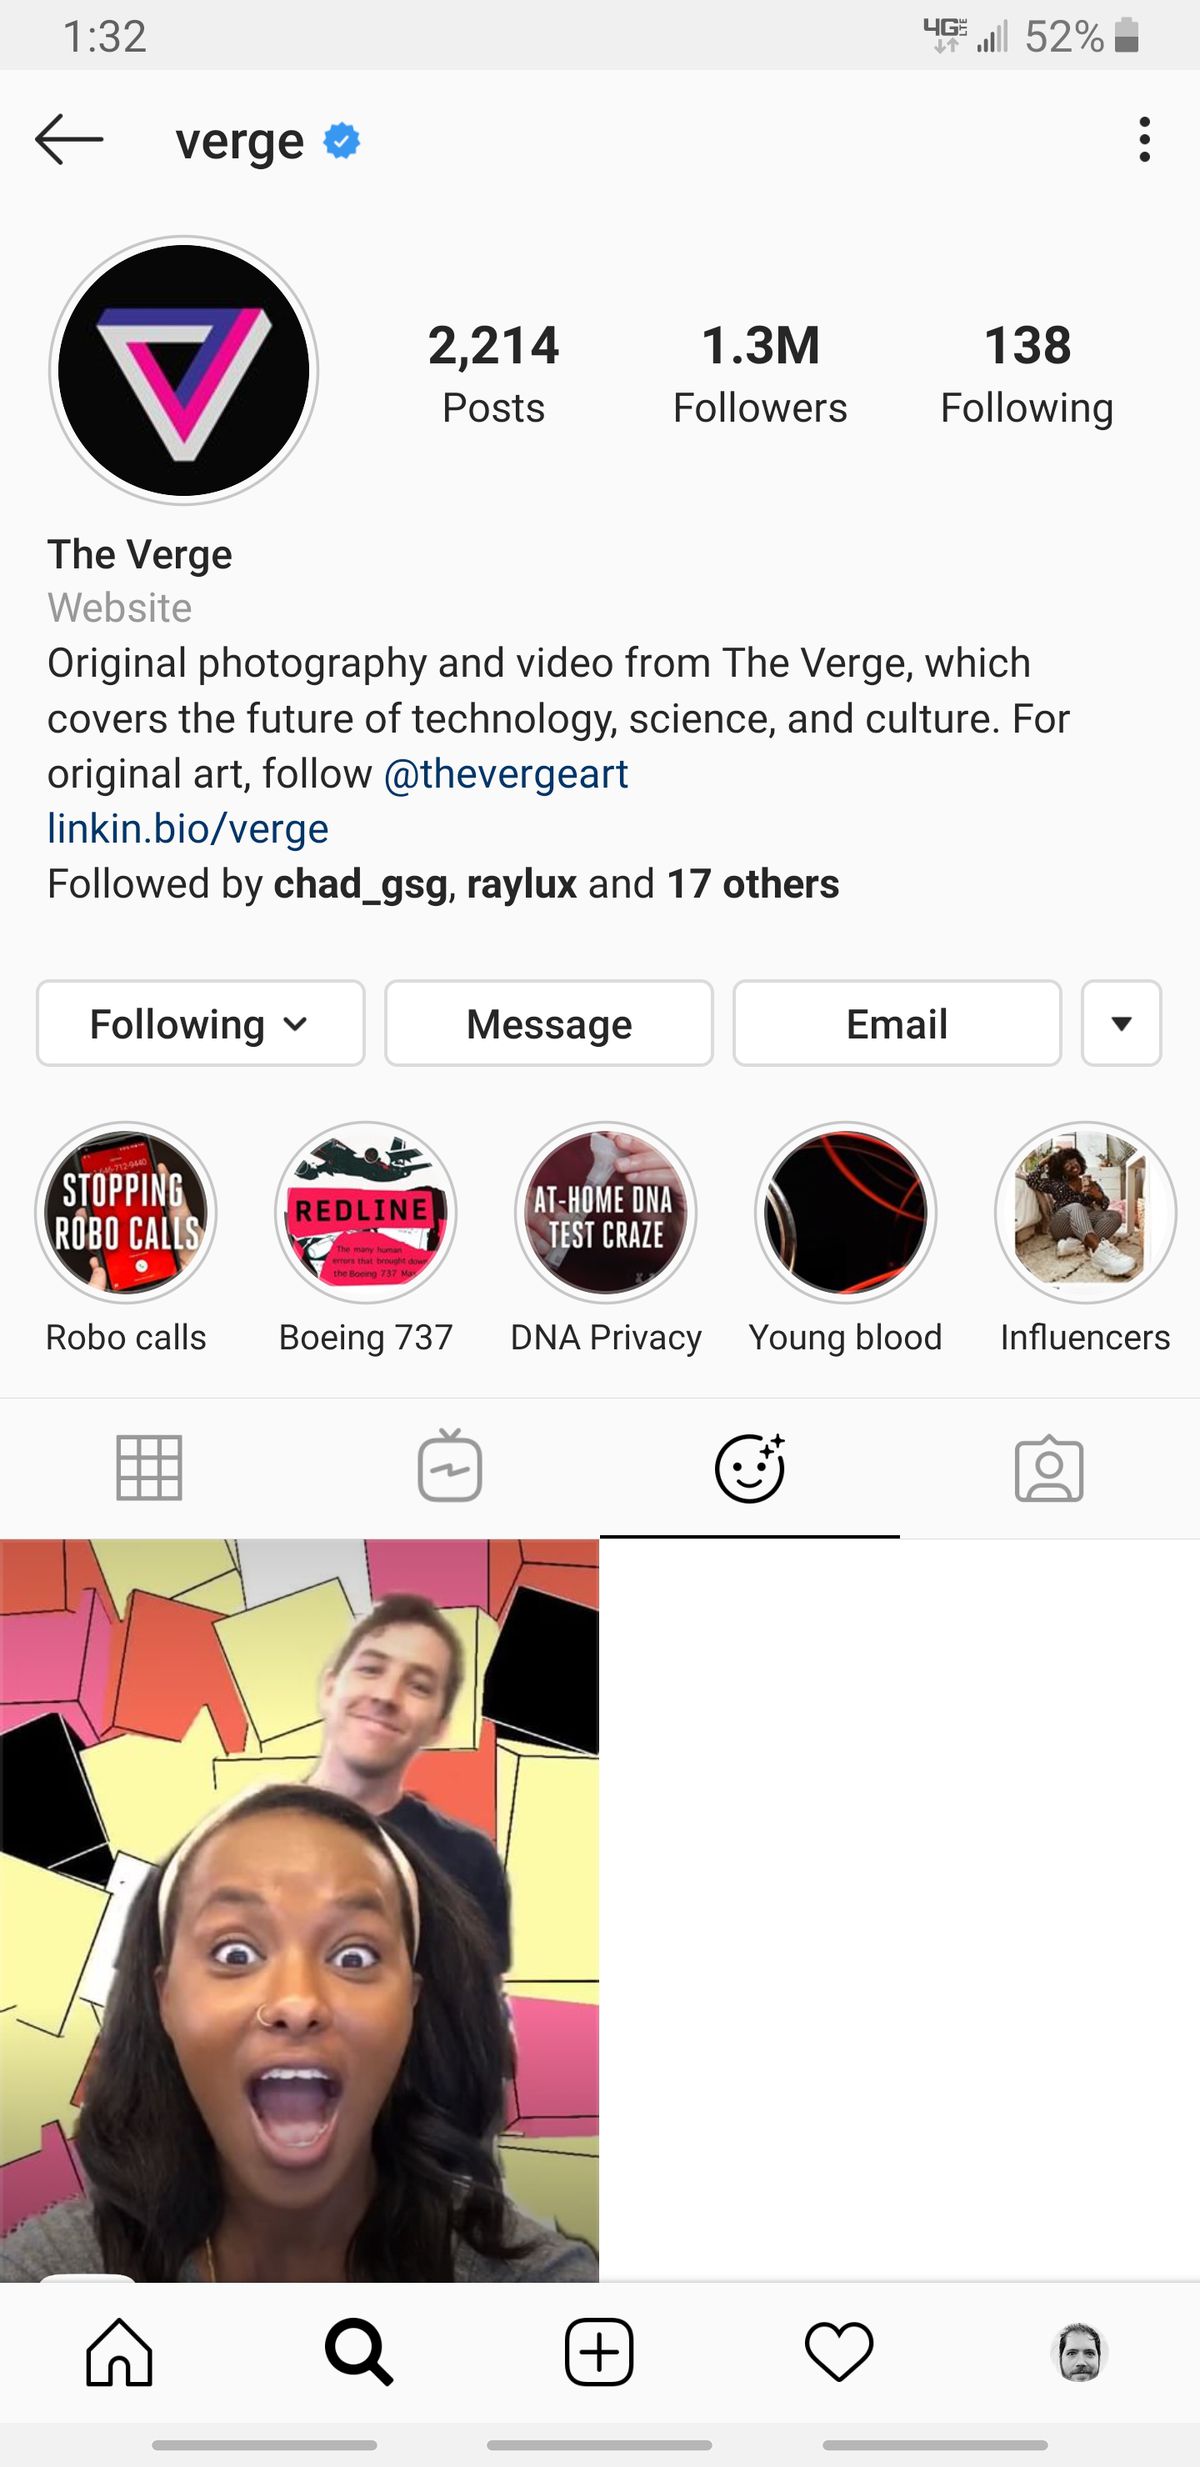 Facebook and beta testers.) We here at The Verge have already used it to create our first filter, which you can see and share through Instagram’s mobile app by going to The Verge’s Instagram account and tapping on the face icon.&nbsp;